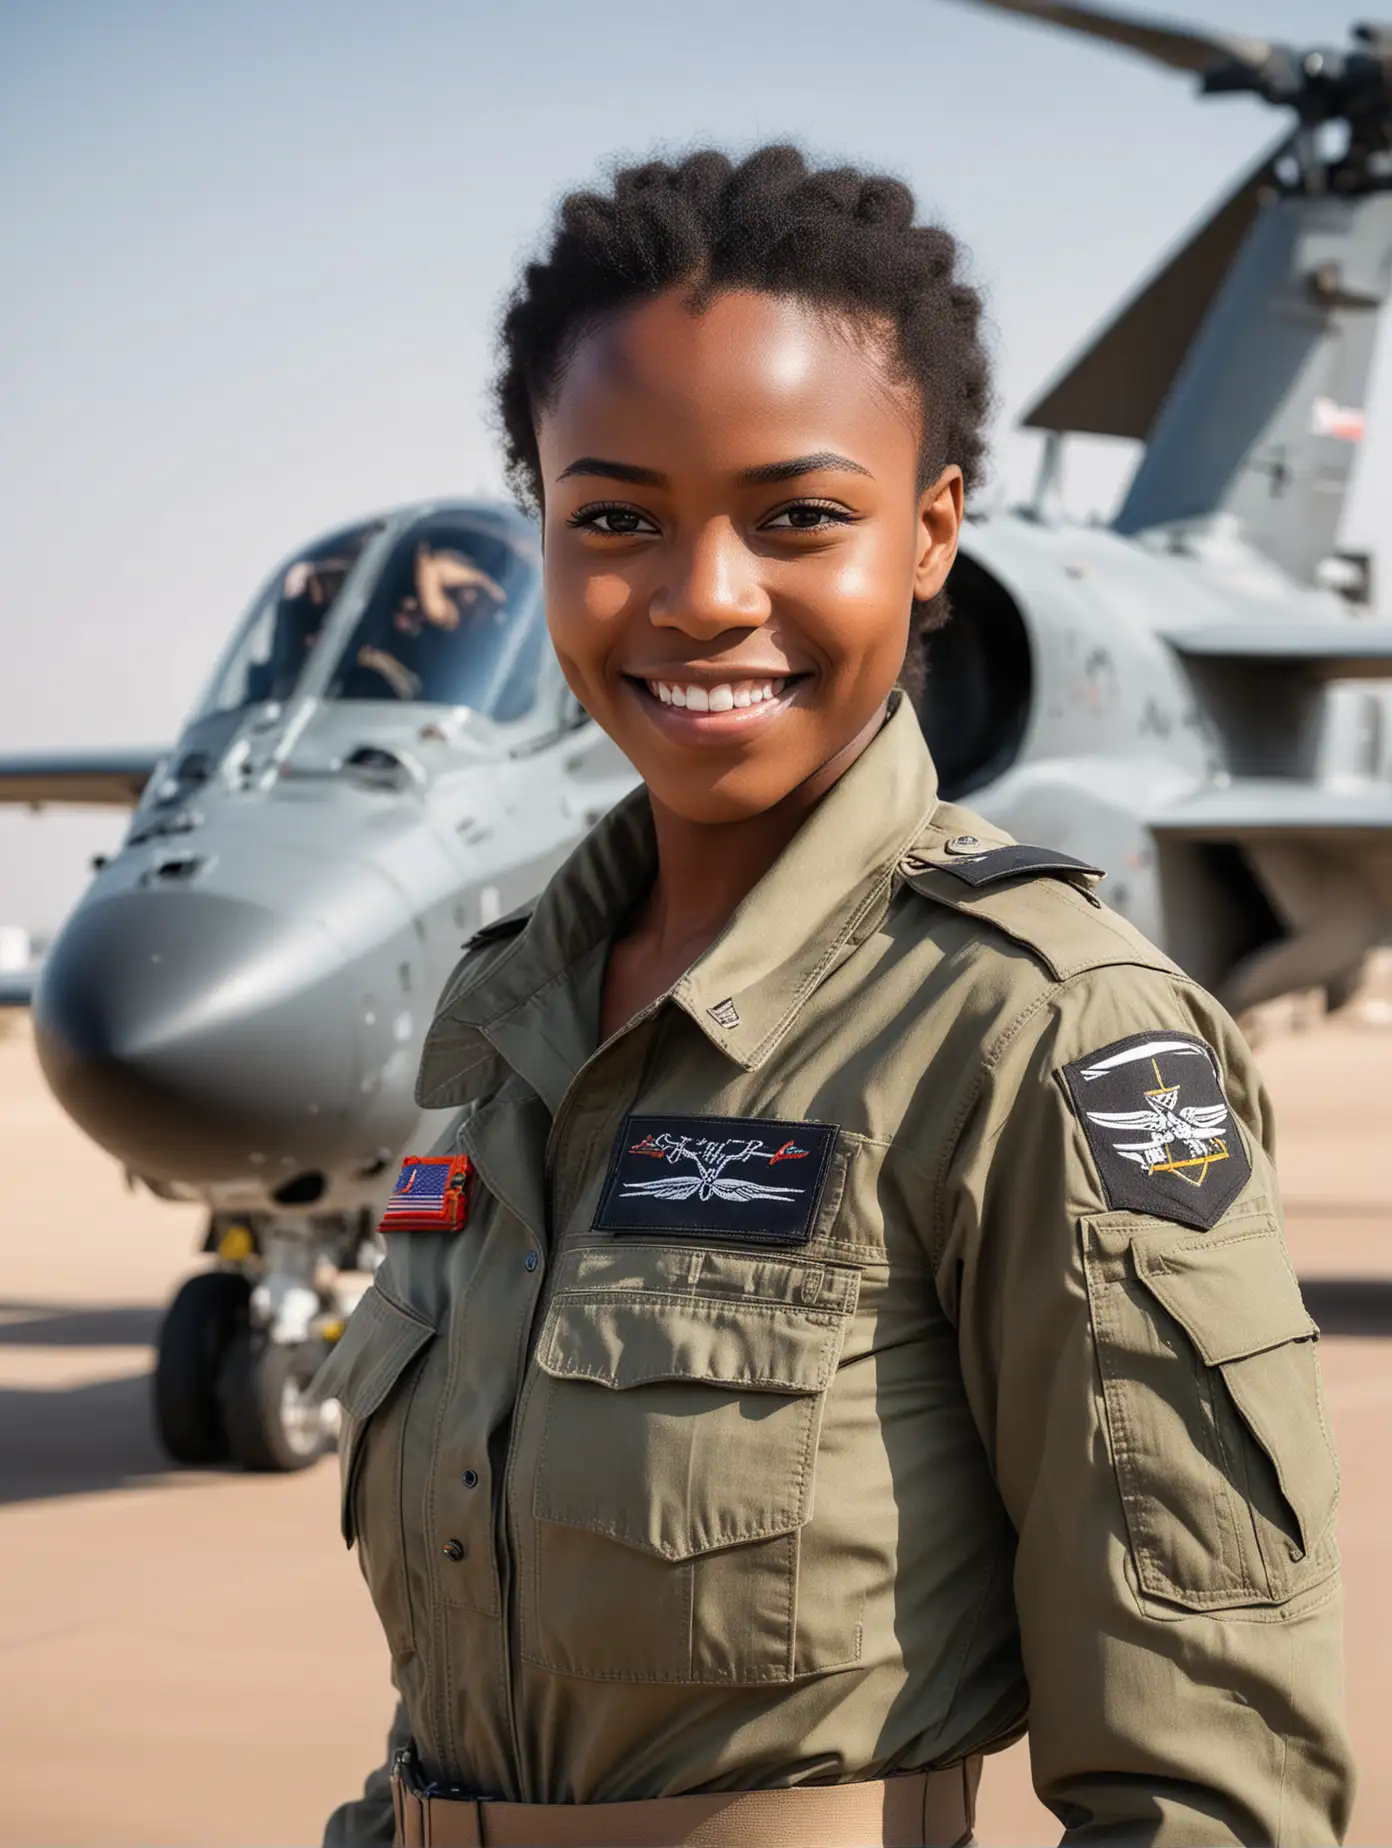 Smiling African Girl in Military Uniform with Apache Helicopter and F22 Fighter Plane Background